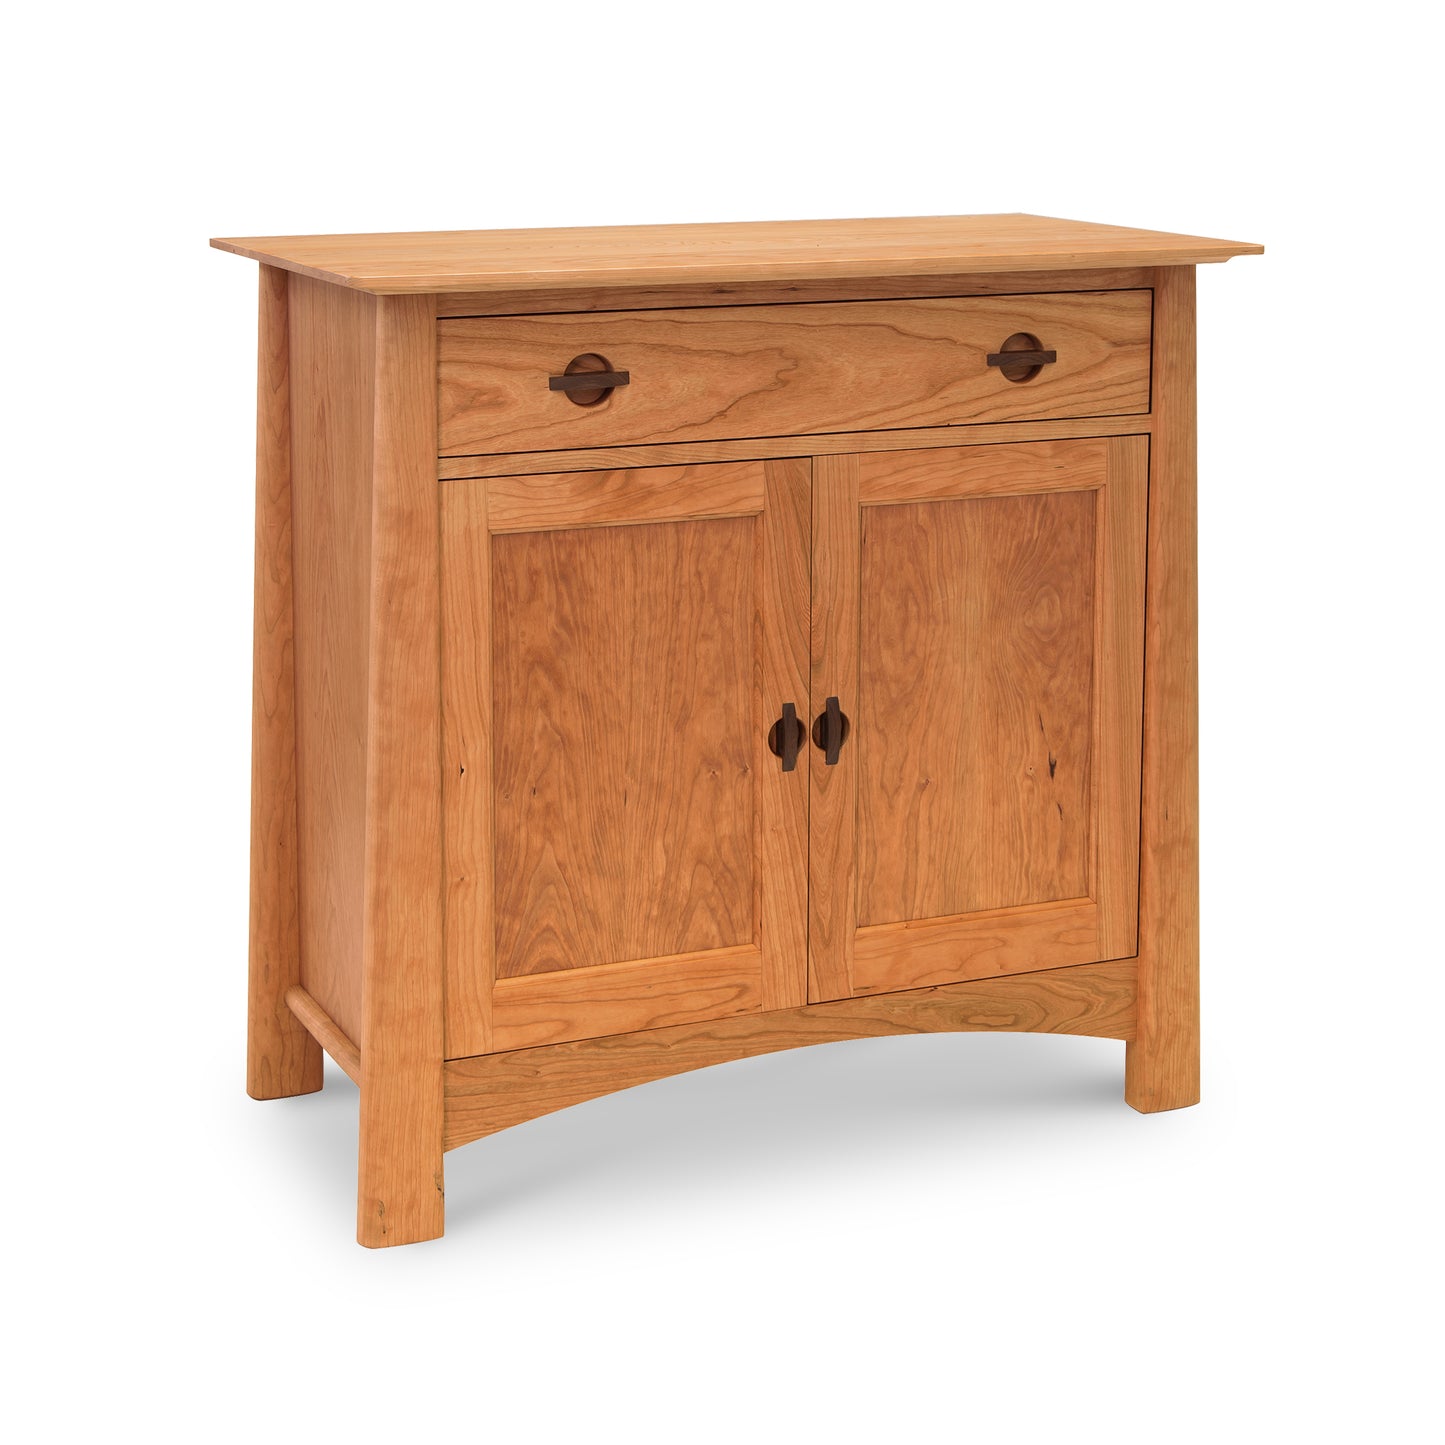 A Cherry Moon Small 38" Sideboard from Maple Corner Woodworks, with a drawer on top and two doors below, featuring dark metal handles, against a white background.